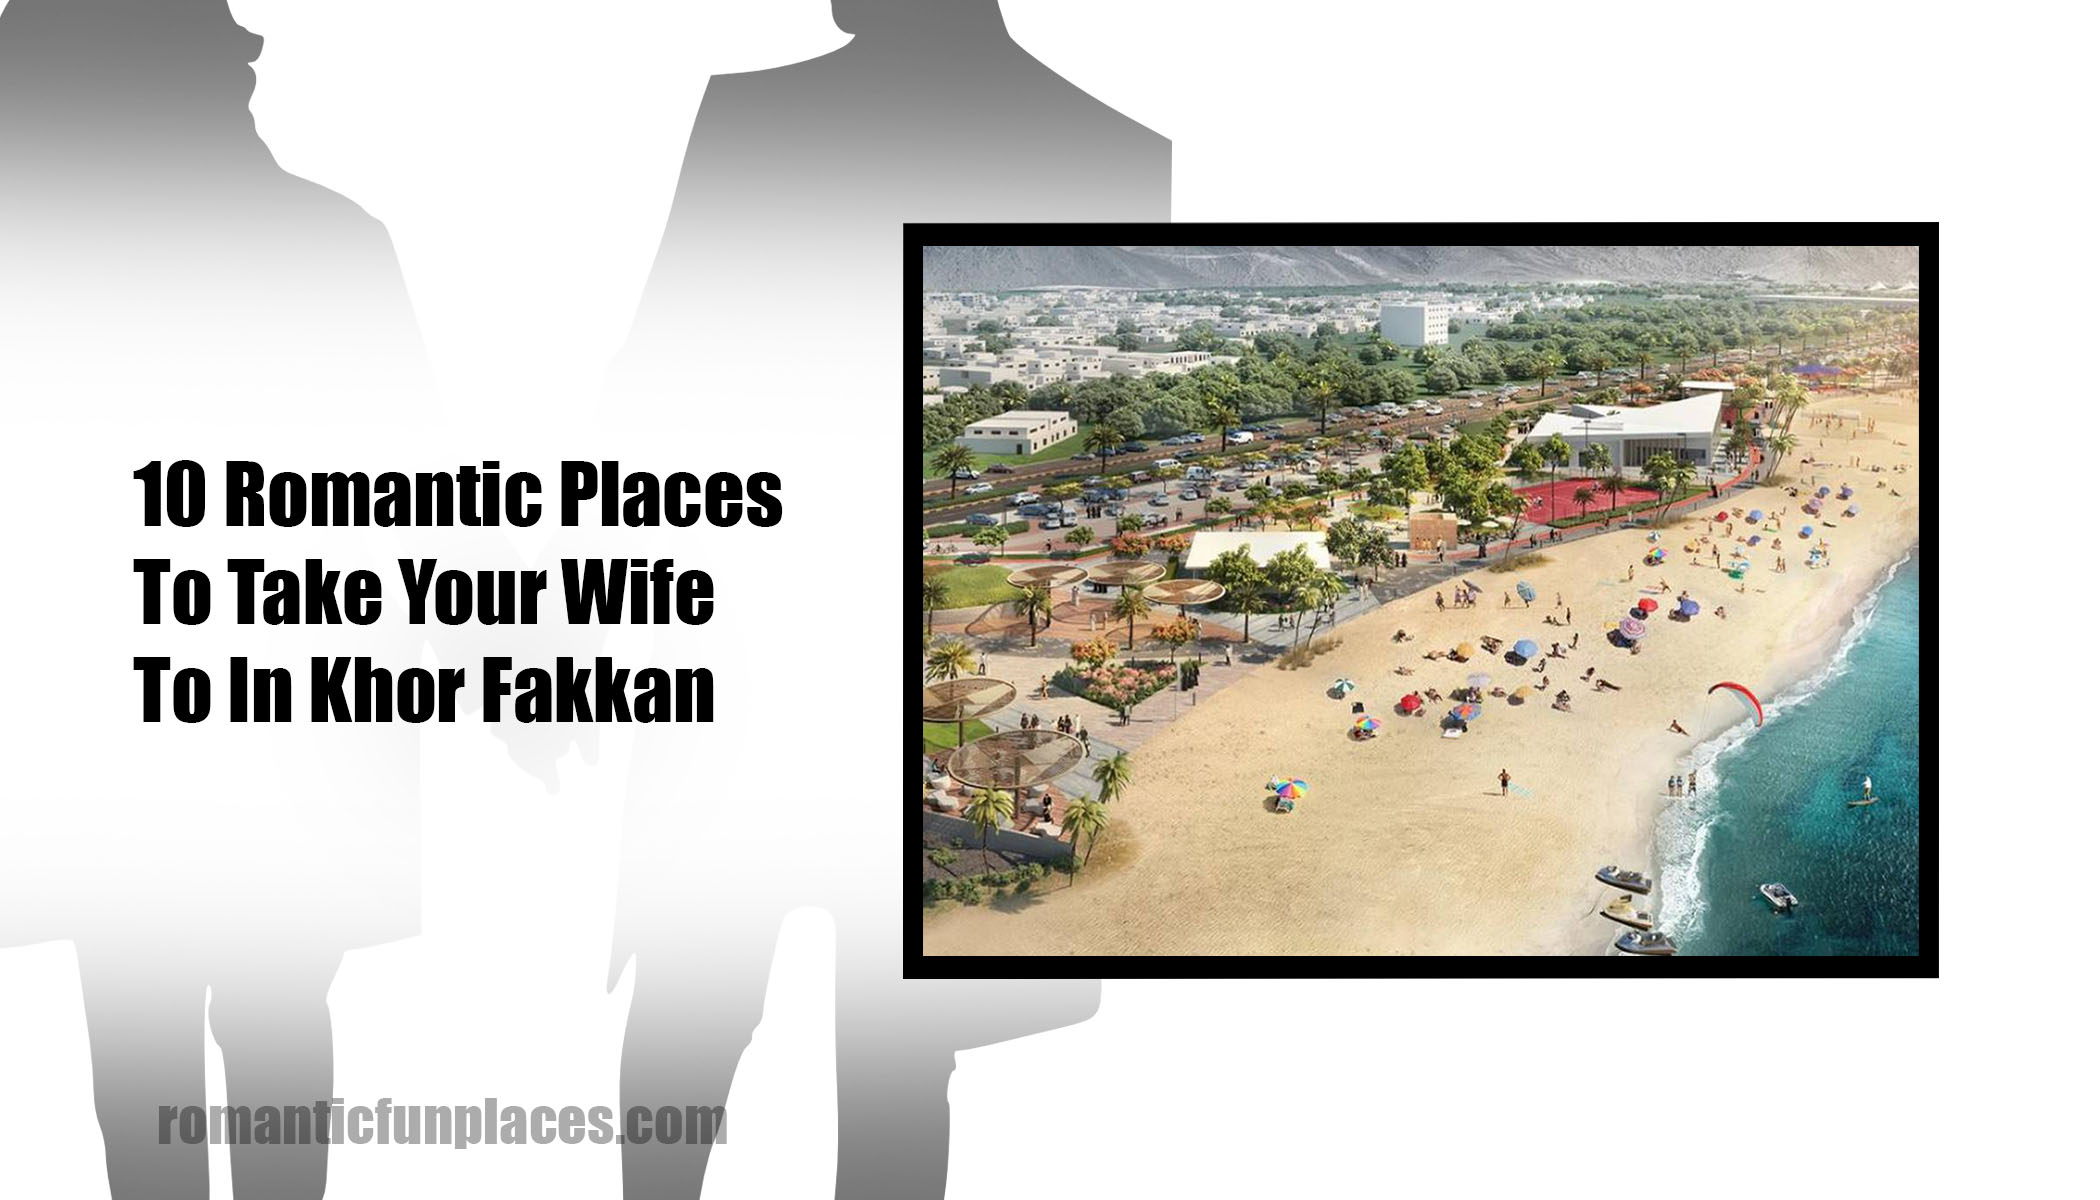 10 Romantic Places To Take Your Wife To In Khor Fakkan